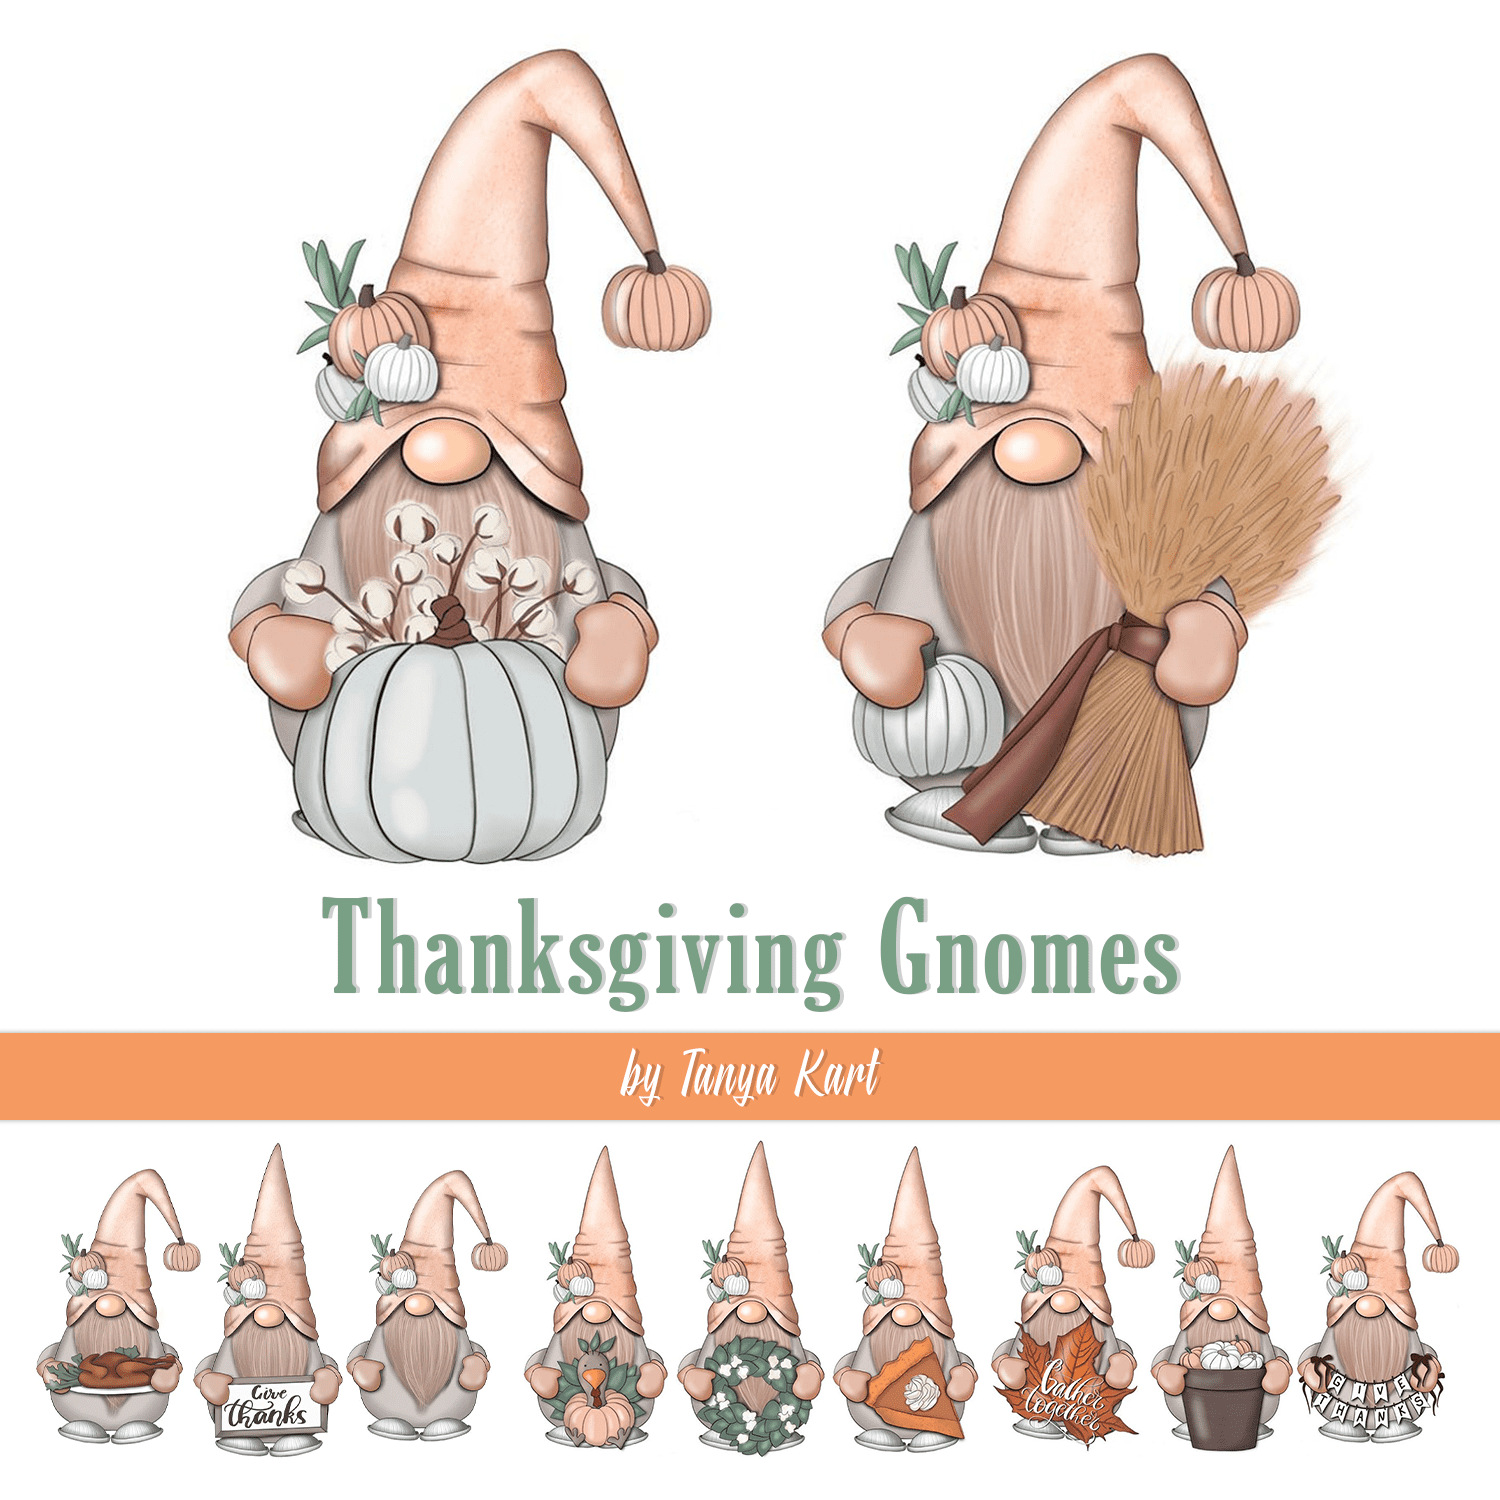 Thanksgiving Gnomes cover.